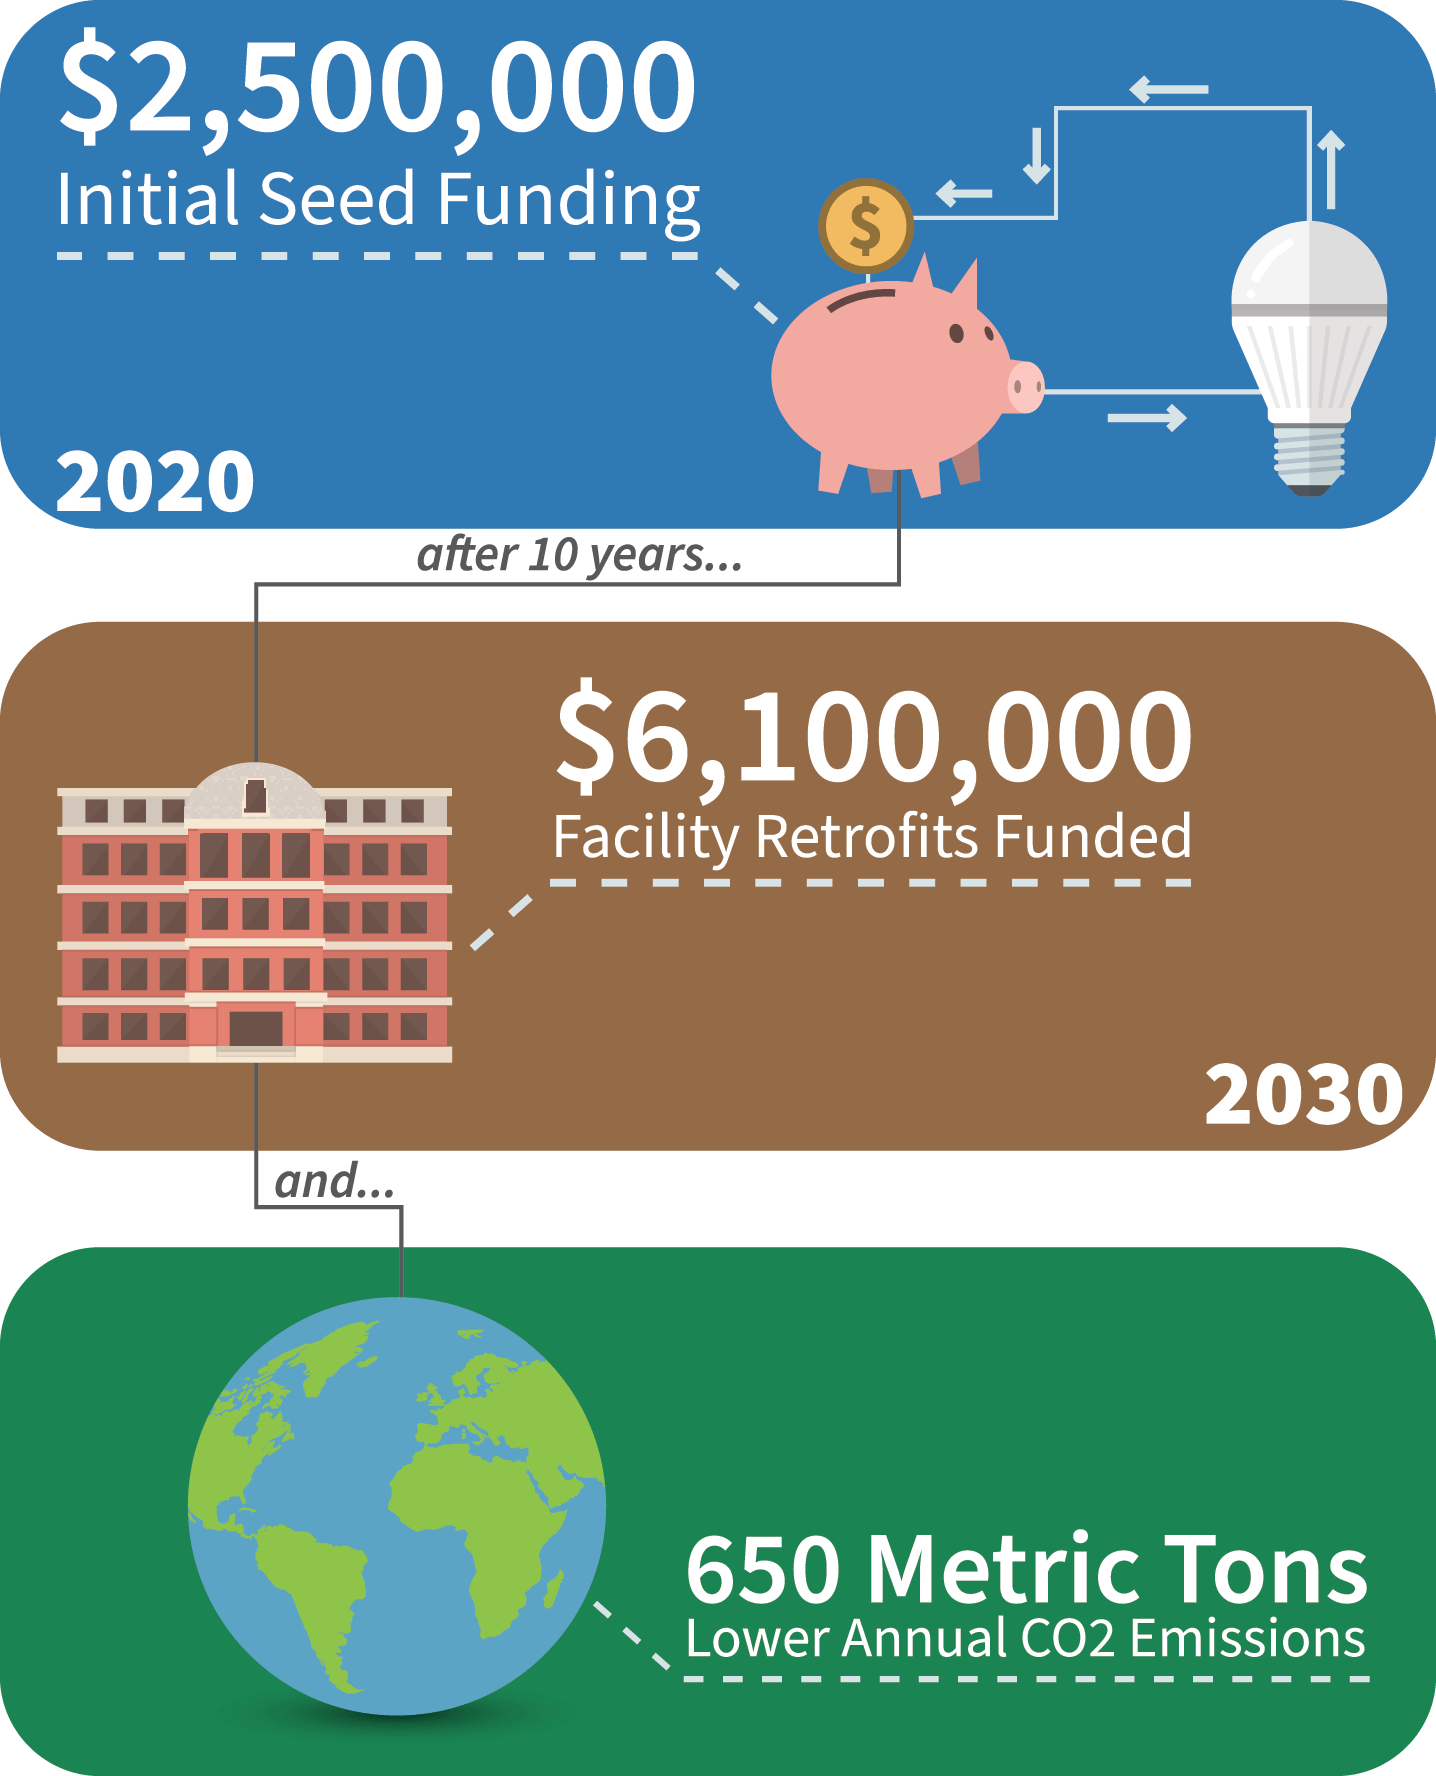 2020: $2.5 million initial seed funding; 2030: $6.1 million facility retrofits funded; 650 metric tons lower annual CO2 emissions.